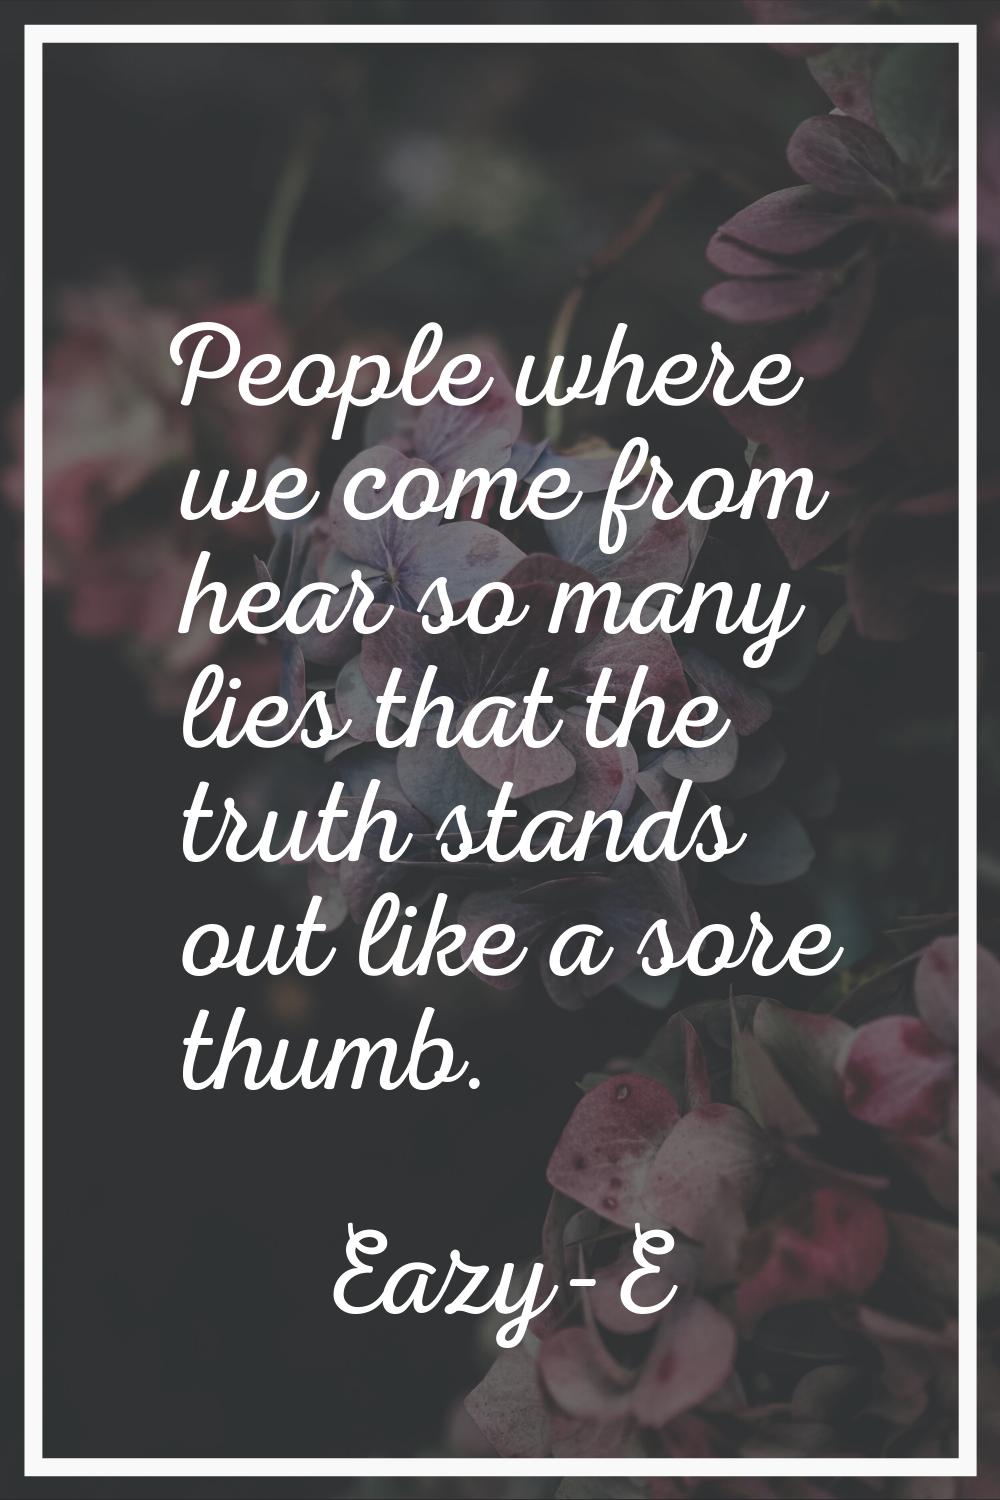 People where we come from hear so many lies that the truth stands out like a sore thumb.